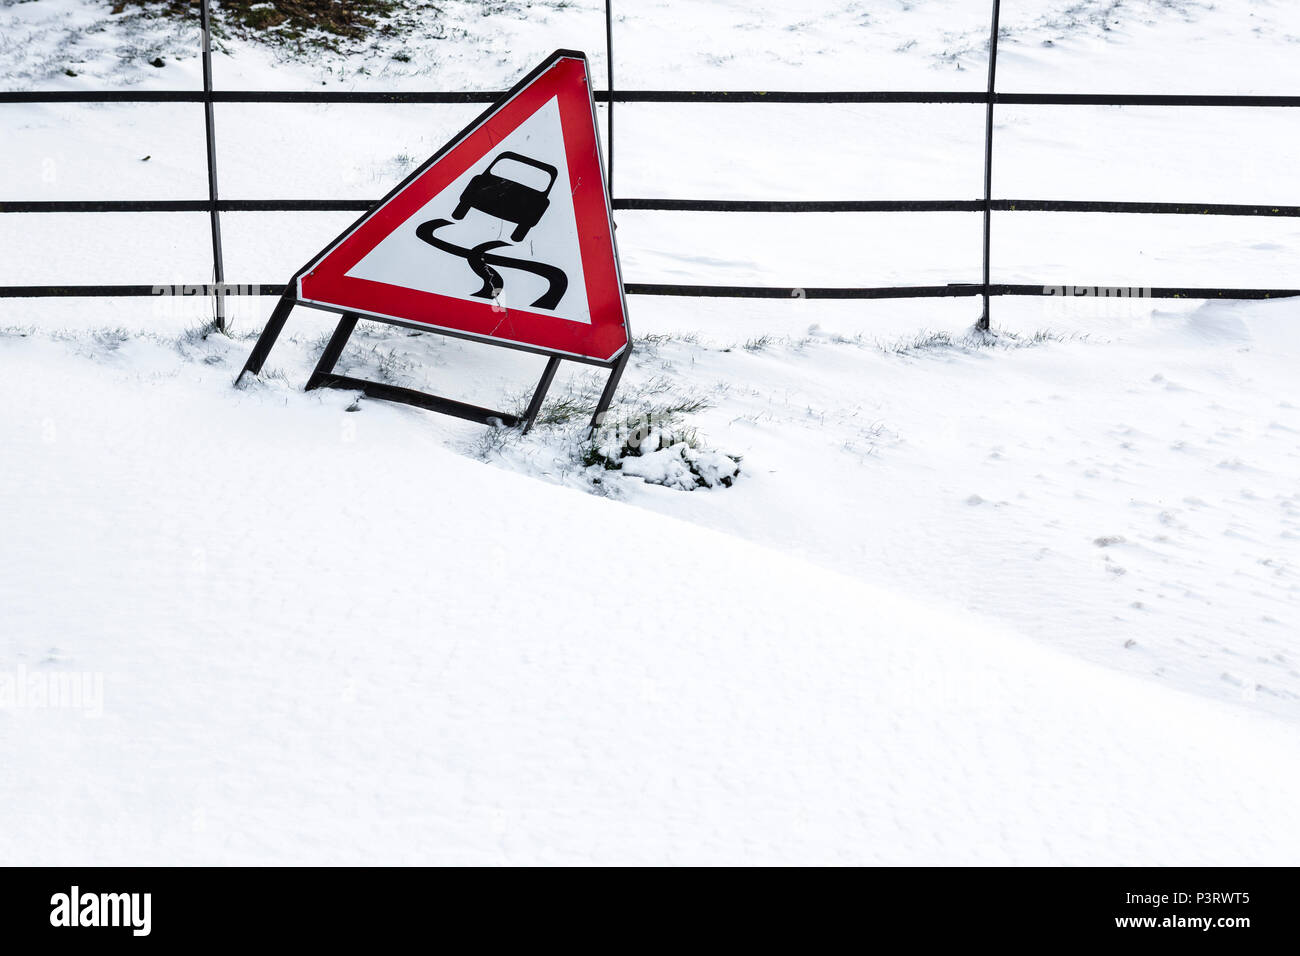 A metal fence partially buried under mounds of drifting snow with a road sign leaning on it indicating slippery roads for vehcile travel. Stock Photo